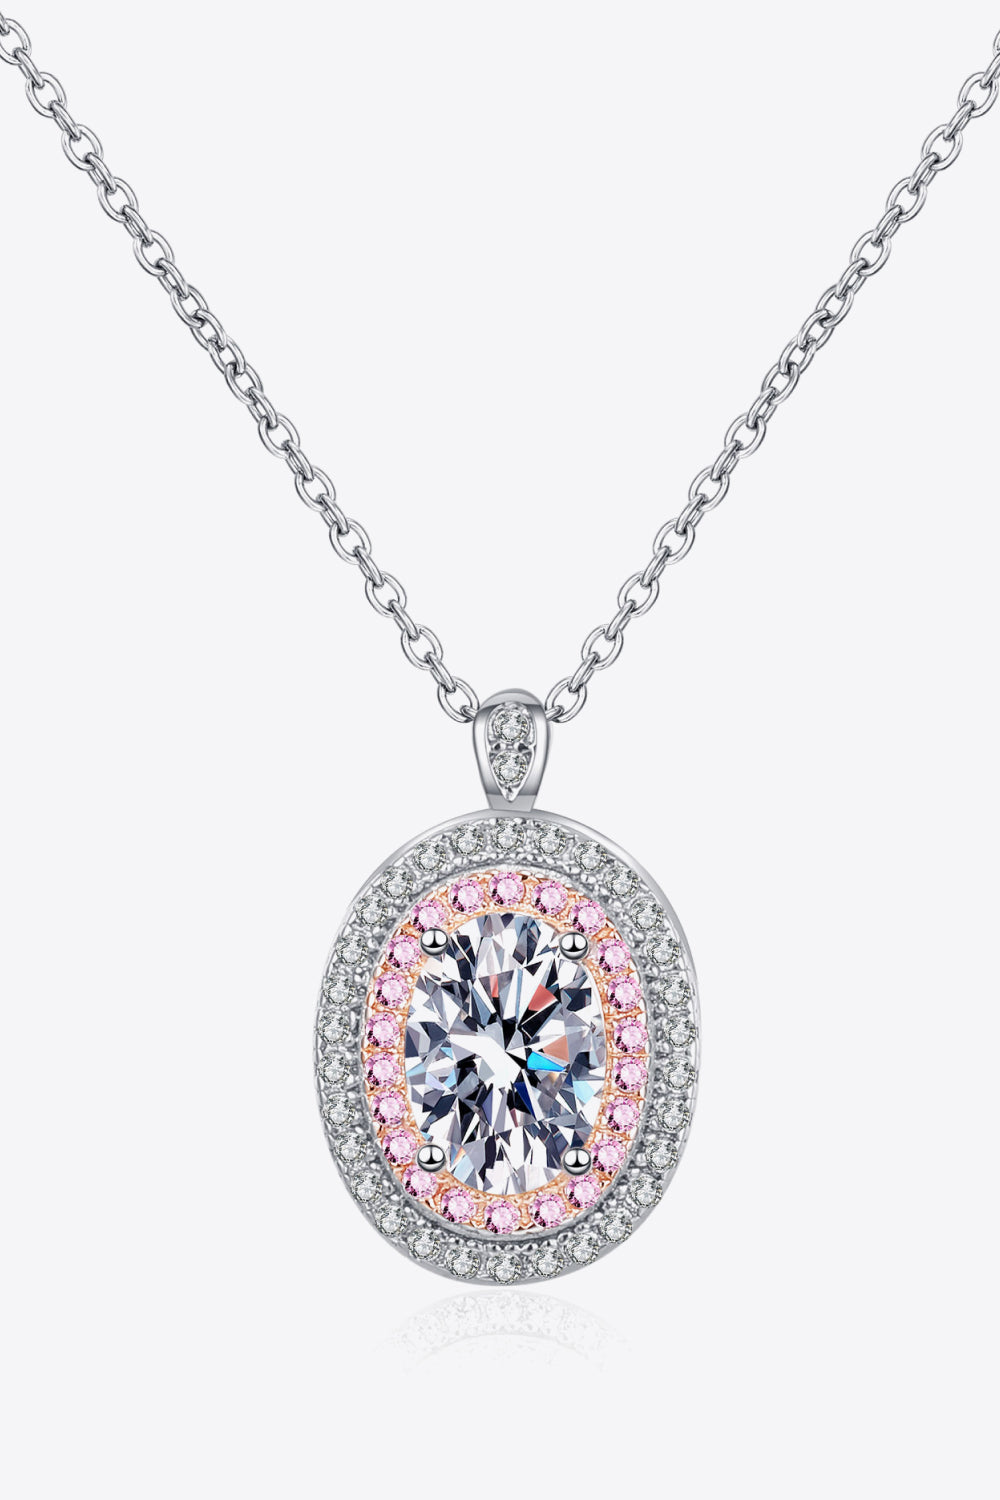 Need You Now Oval Sterling Silver Rhodium-Plated 1 Carat Moissanite Pendant Necklace